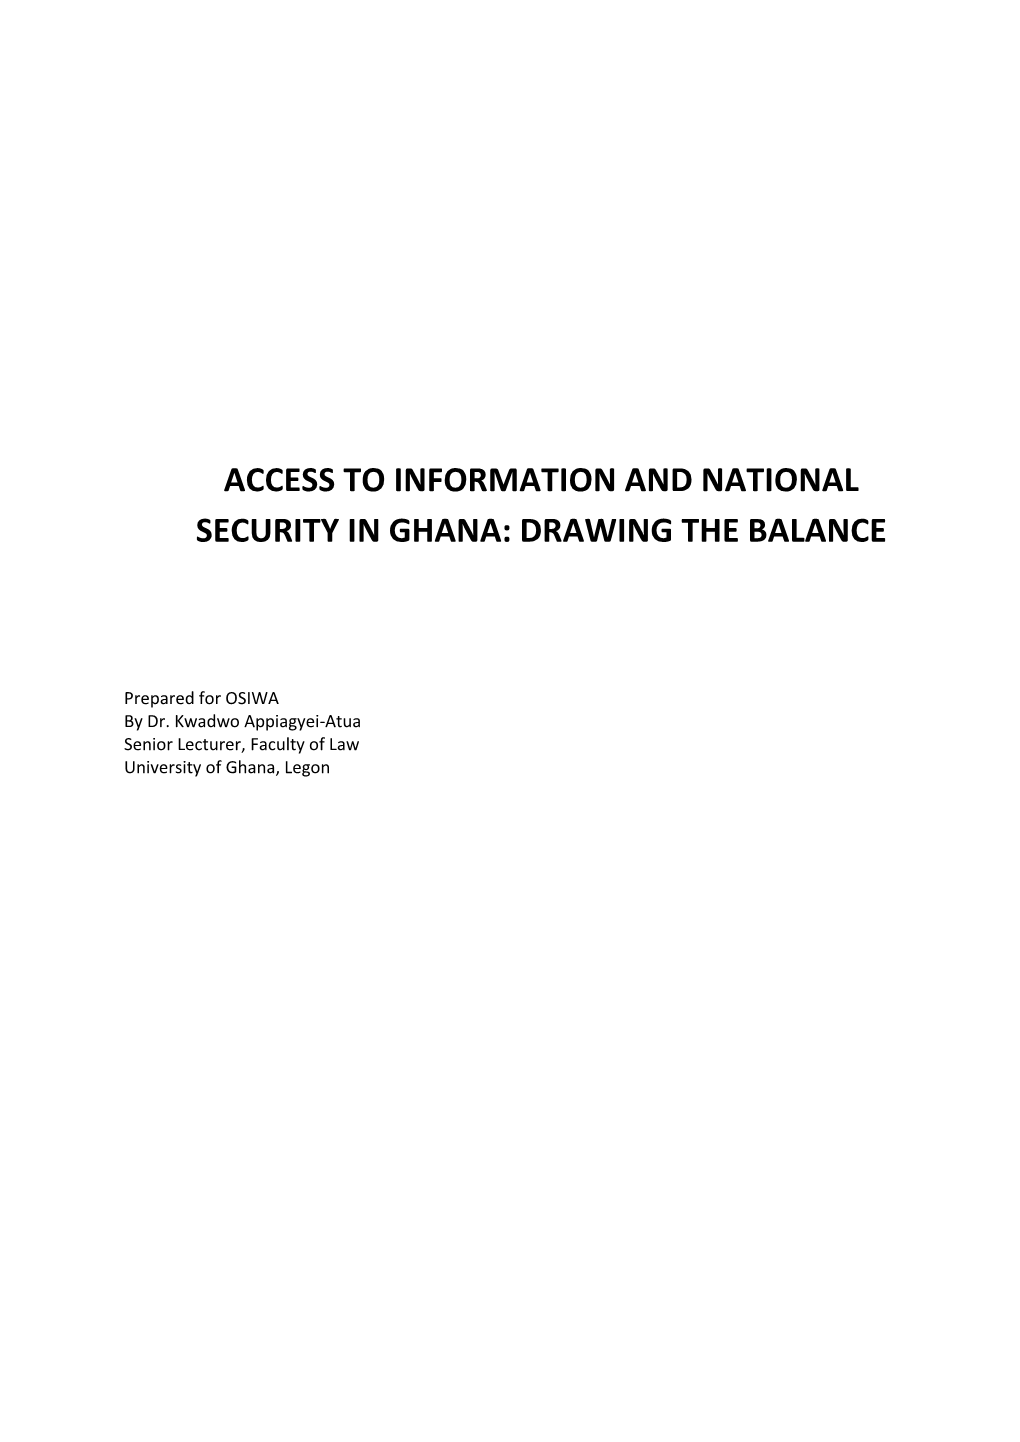 Access to Information and National Security in Ghana: Drawing the Balance